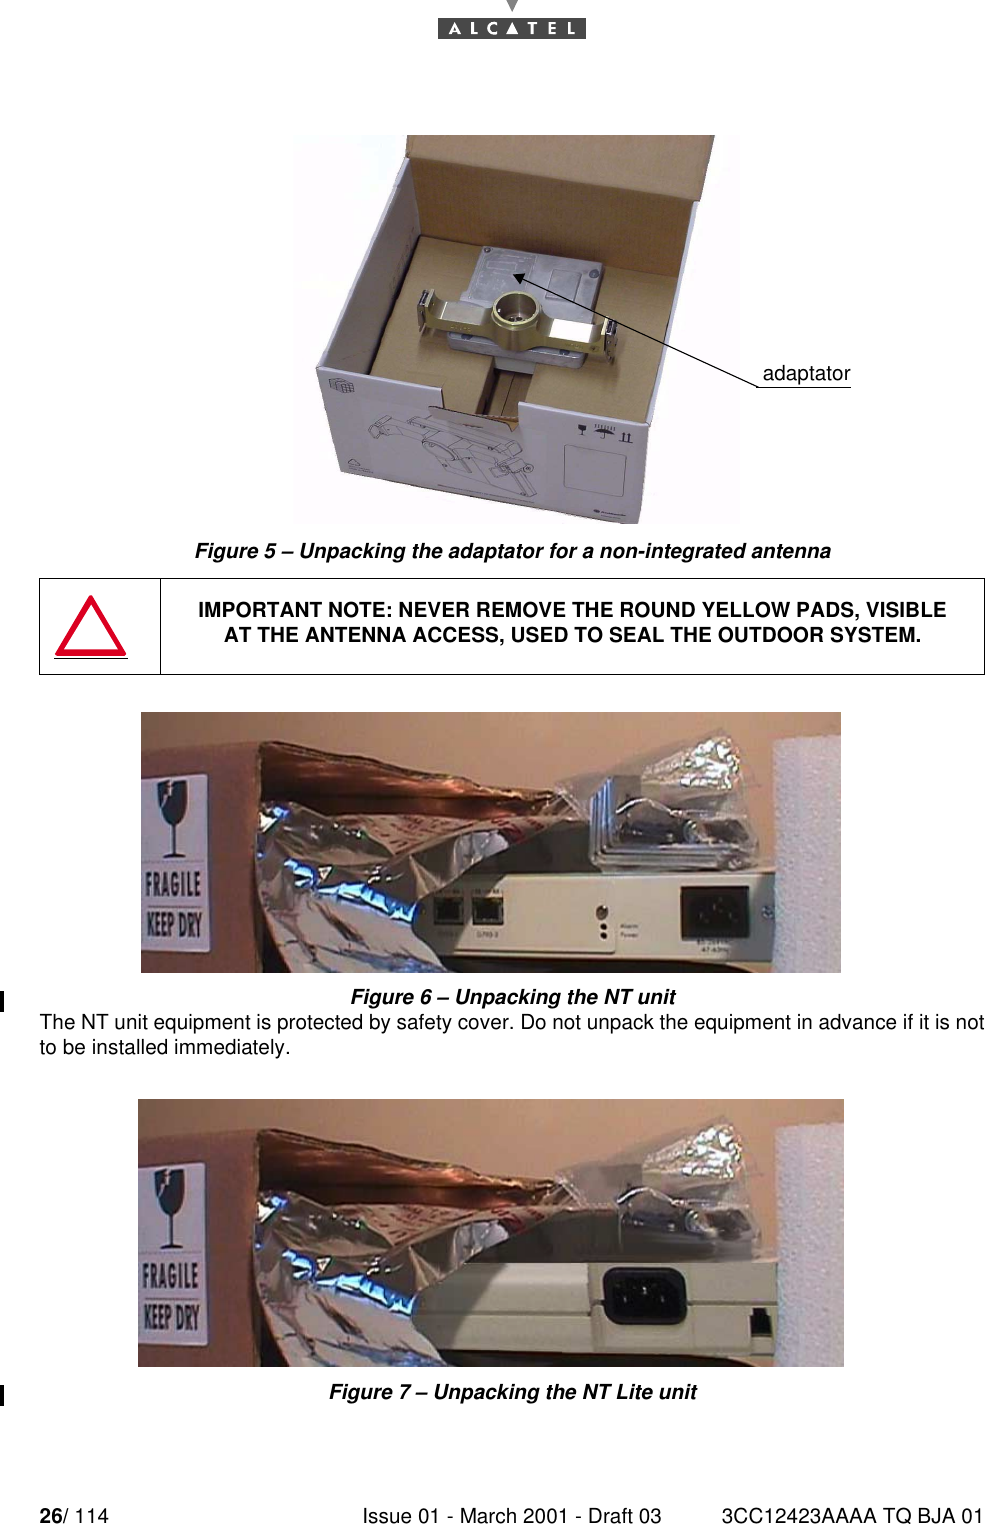 26/ 114 Issue 01 - March 2001 - Draft 03 3CC12423AAAA TQ BJA 0152Figure 5 – Unpacking the adaptator for a non-integrated antennaFigure 6 – Unpacking the NT unitThe NT unit equipment is protected by safety cover. Do not unpack the equipment in advance if it is notto be installed immediately.Figure 7 – Unpacking the NT Lite unitIMPORTANT NOTE: NEVER REMOVE THE ROUND YELLOW PADS, VISIBLEAT THE ANTENNA ACCESS, USED TO SEAL THE OUTDOOR SYSTEM.adaptator adaptator